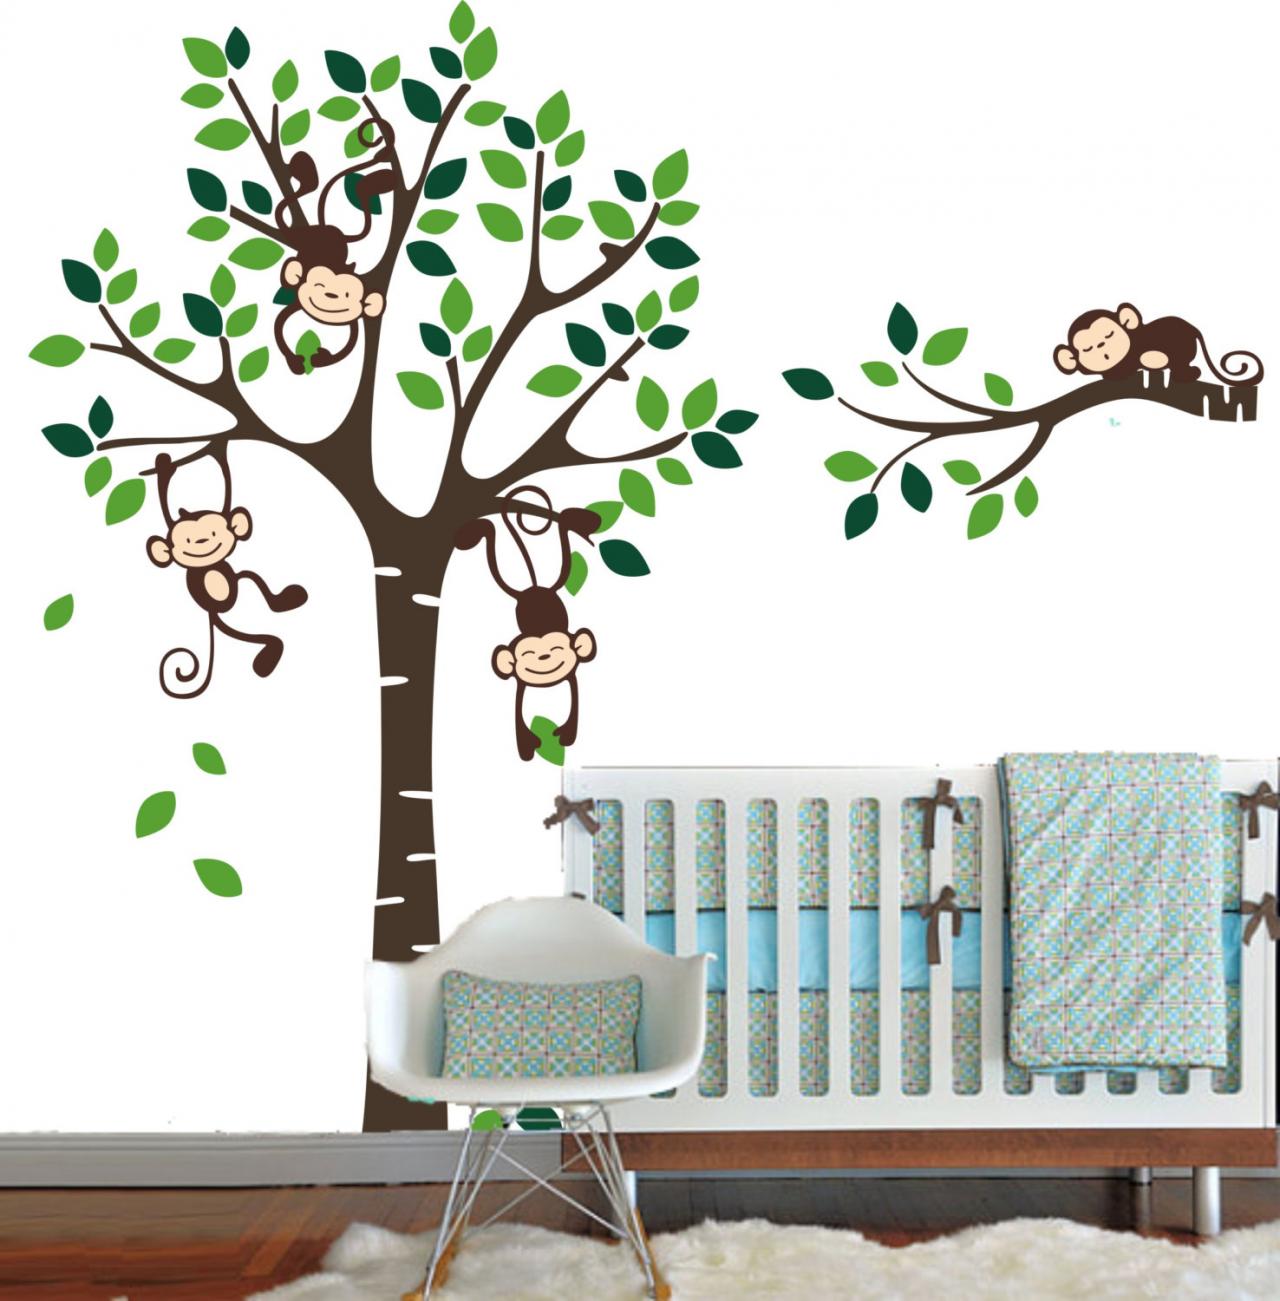 Vinyl Wall Decal Simple Trees With Tree Branch Cute Four Monkey Decals Cubs Home House Wall Decor Wall Sticker Stickers Kids Baby Room R876